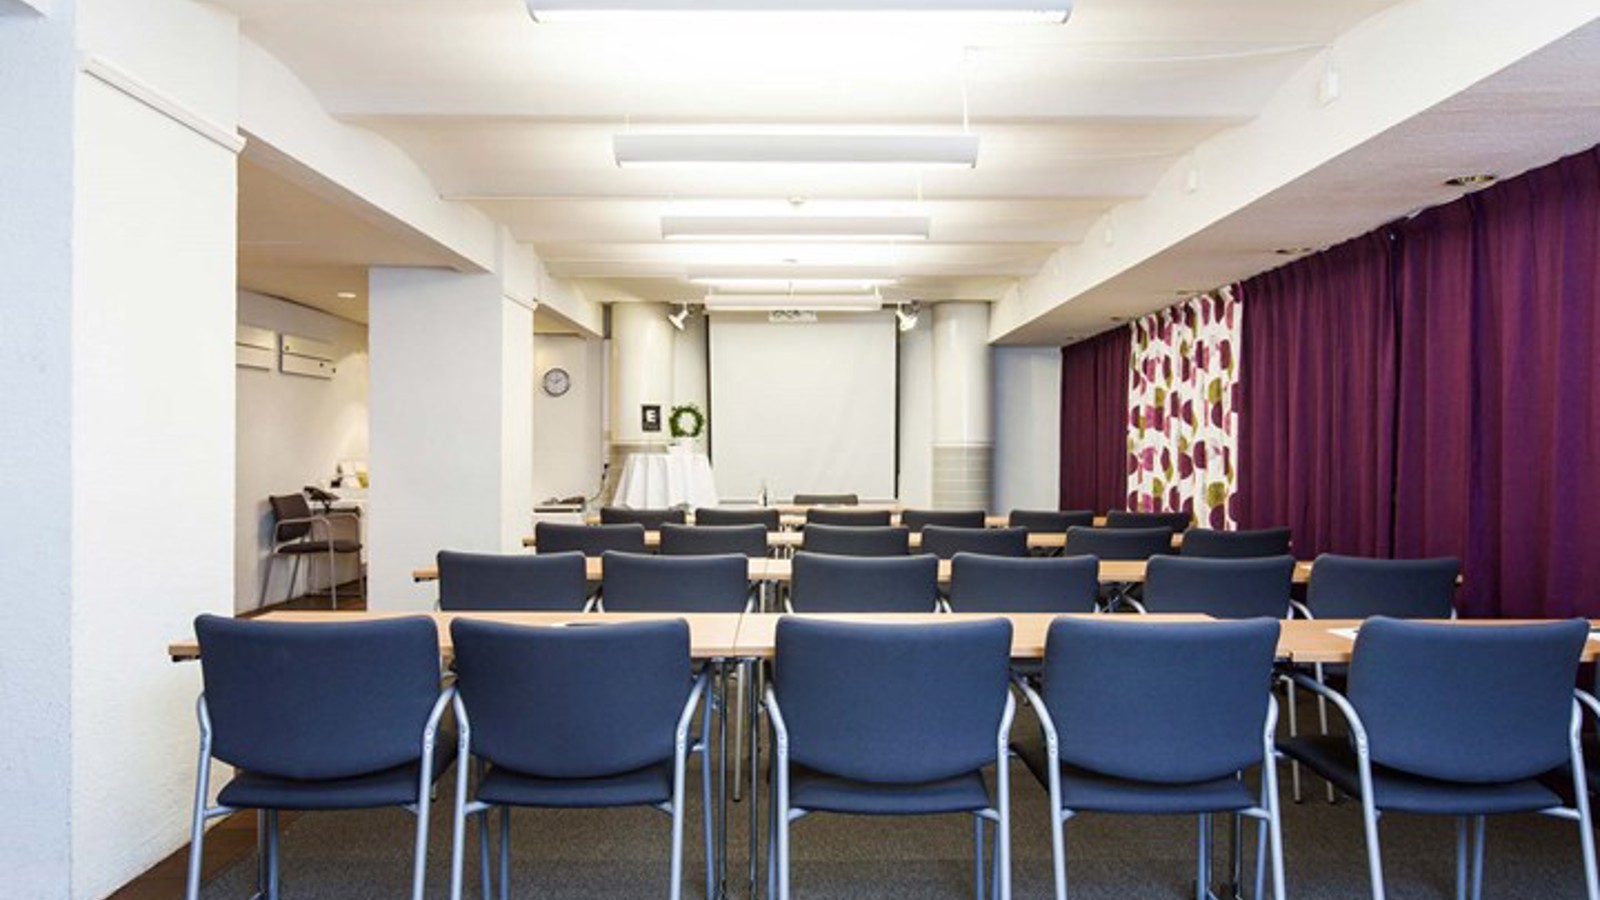 Conference room with lined up blue chairs and purple drapery